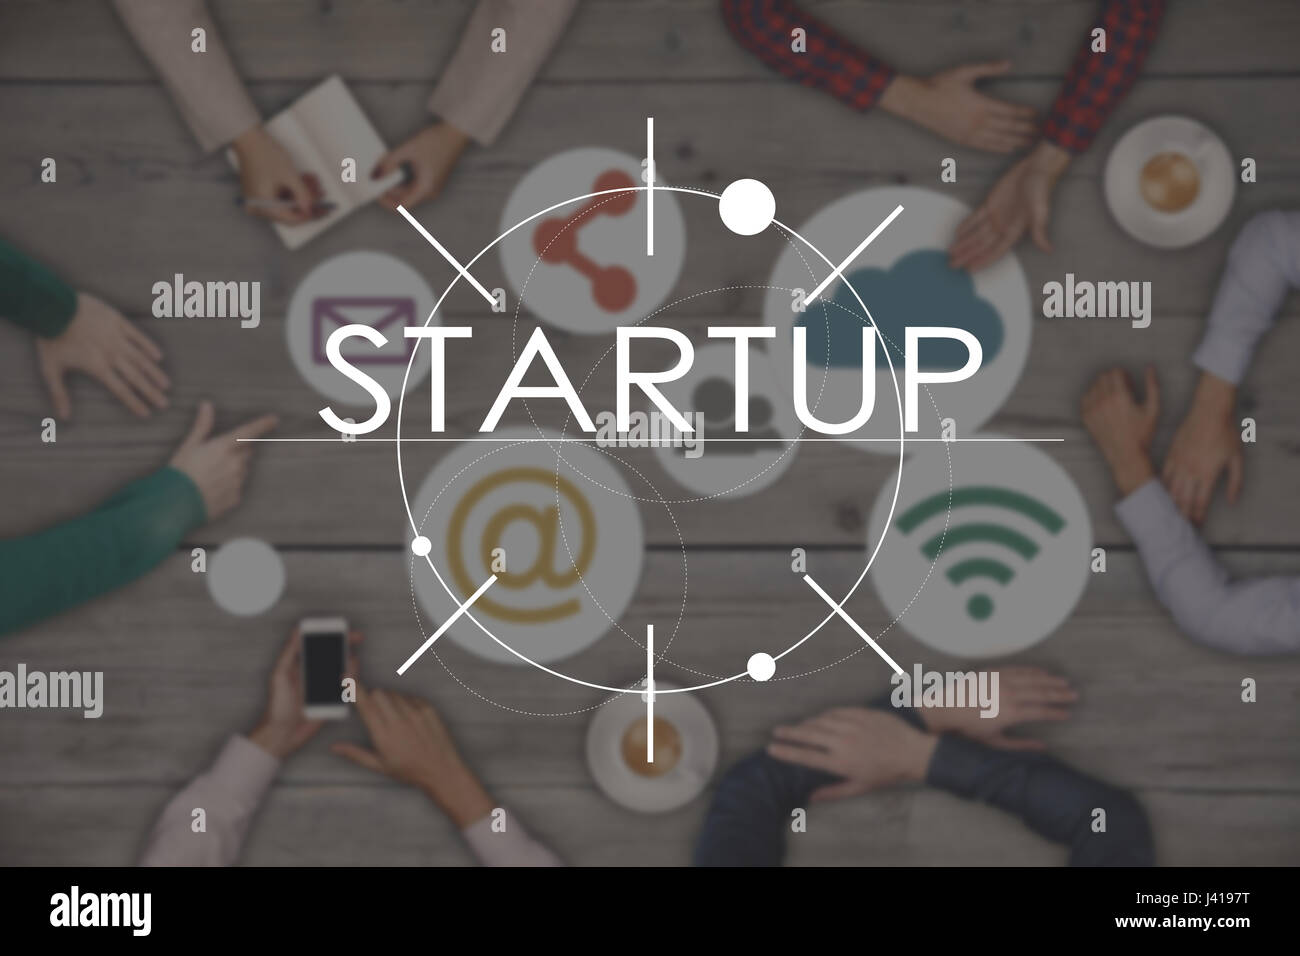 Top view of six People Working and Startup Business Concept Stock Photo